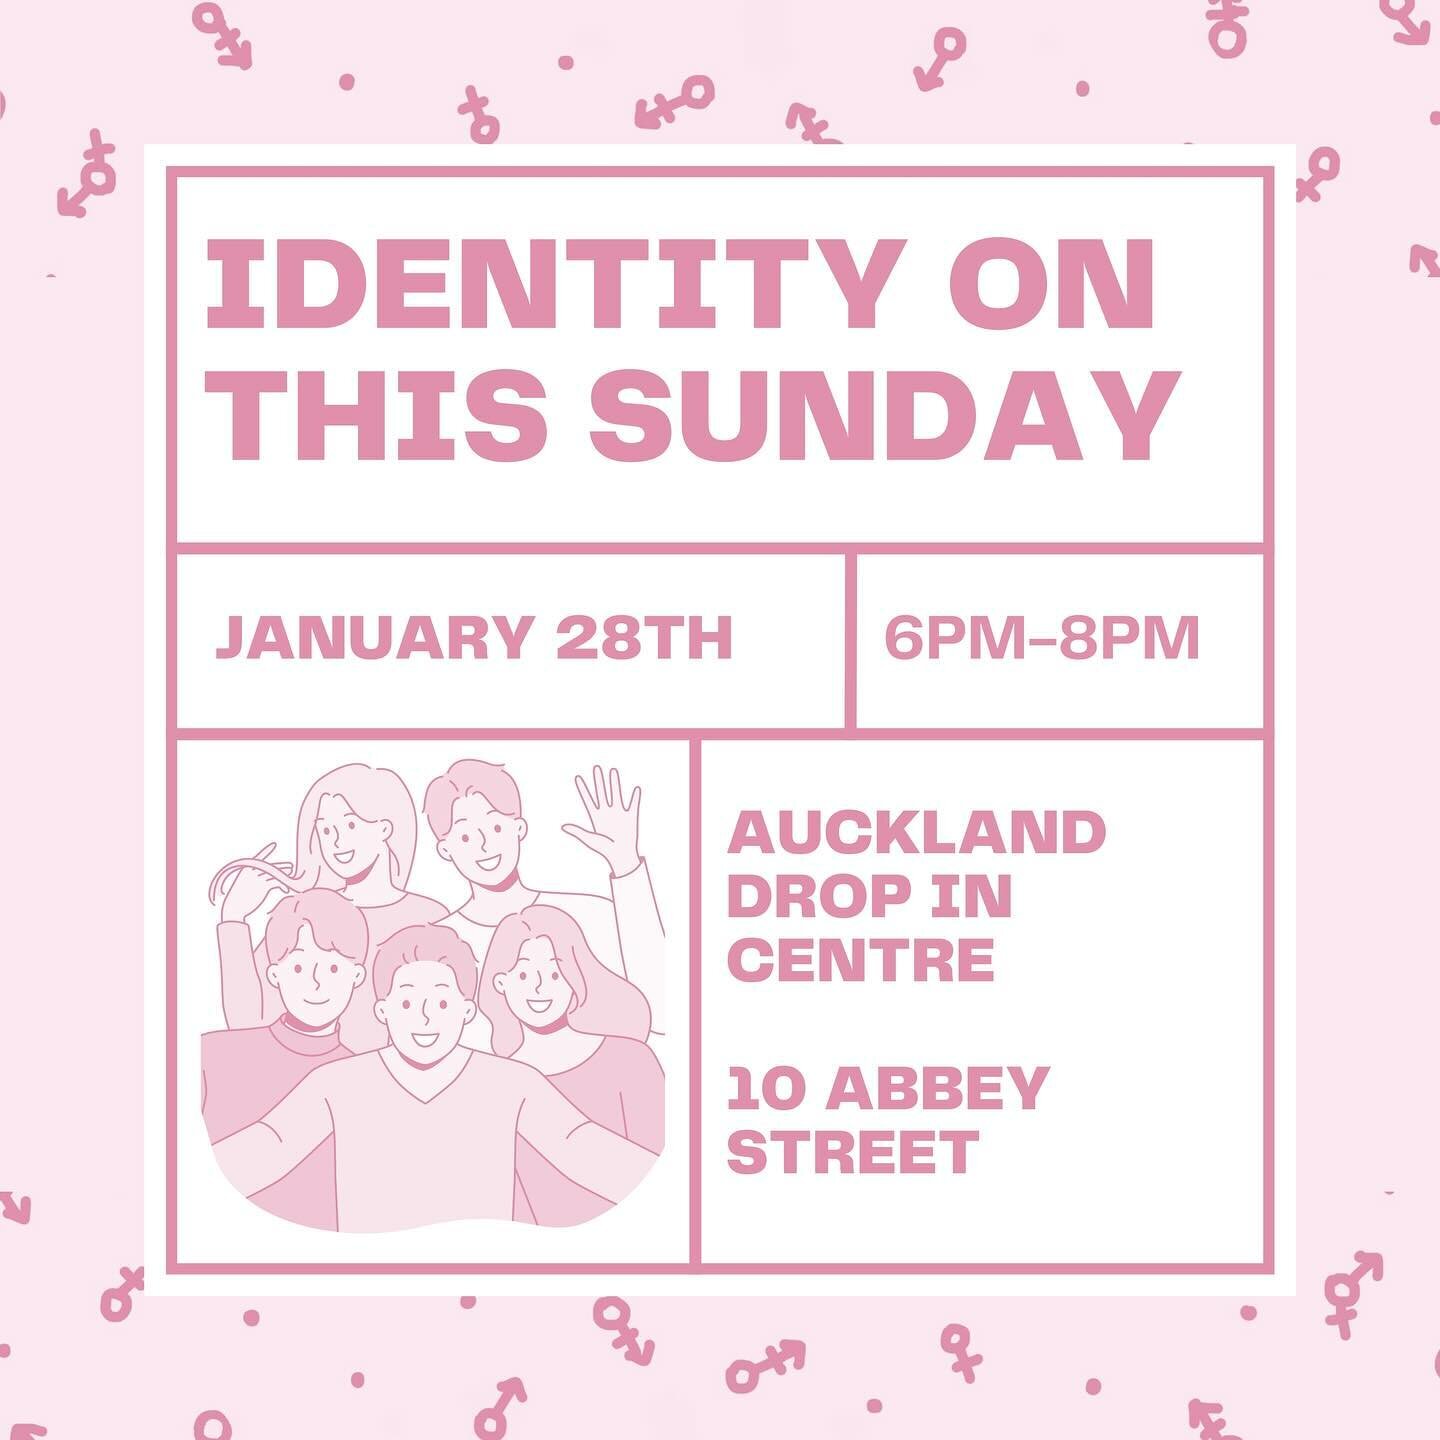 I.D on this Sunday! See you there :)